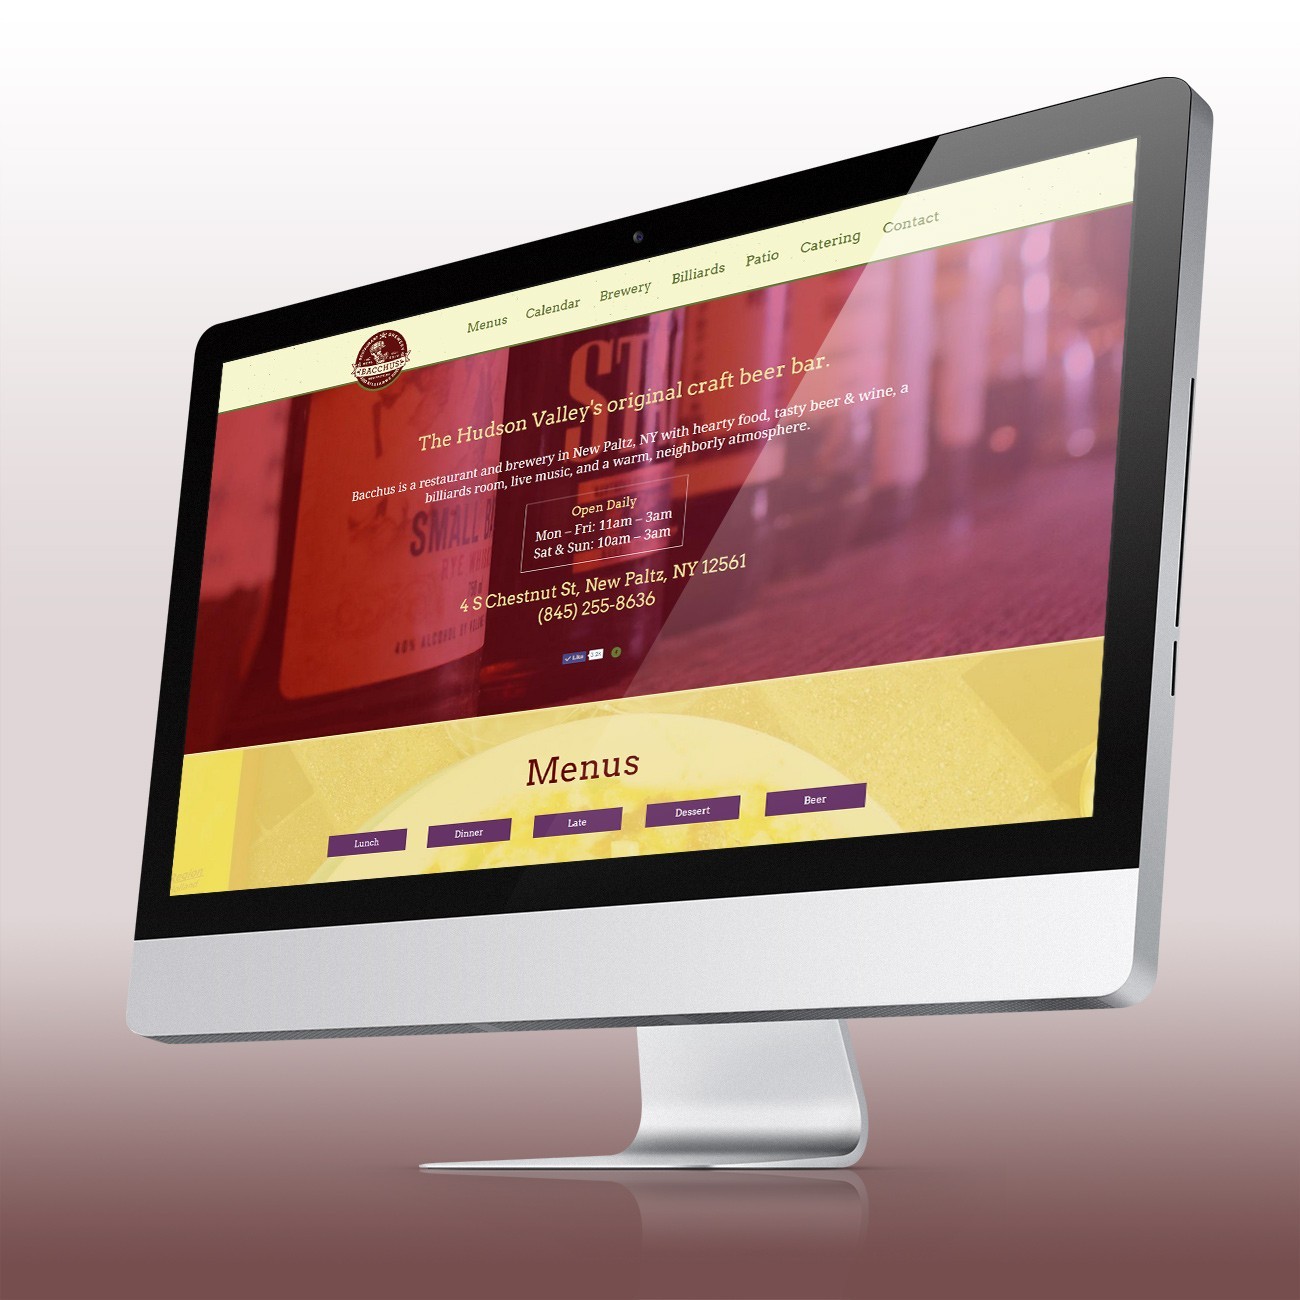 Bacchus Website, designed by Query Creative in the Hudson Valley